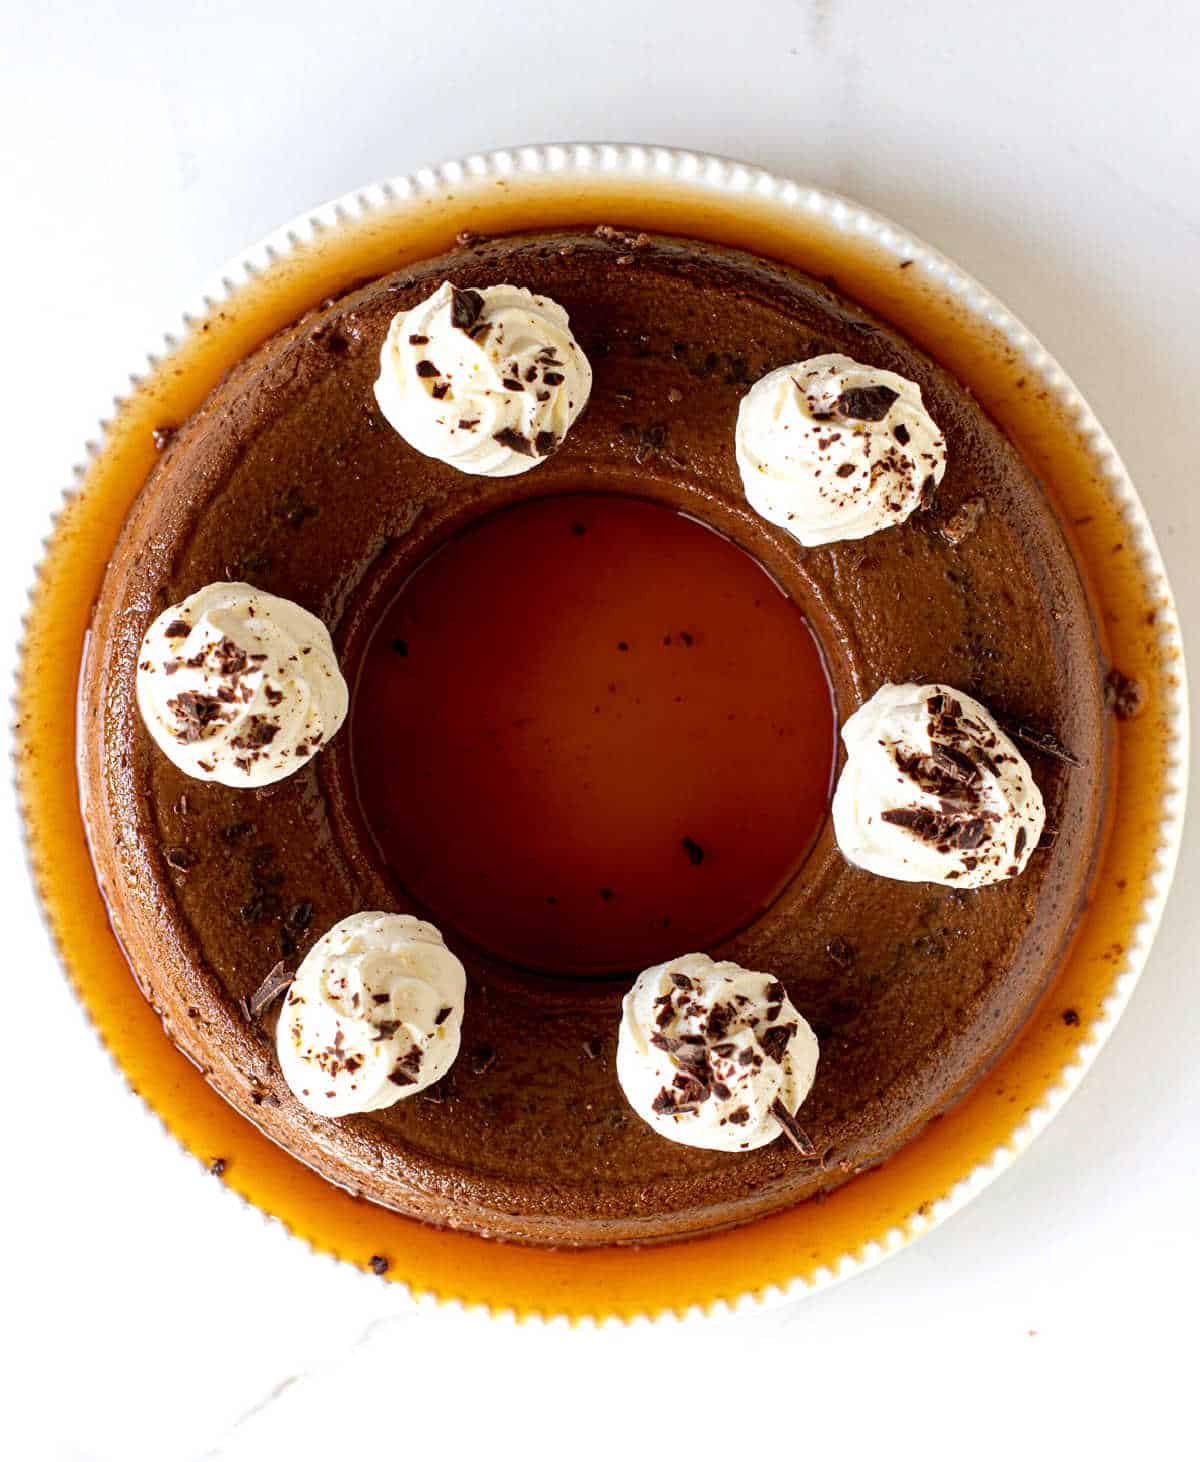 Top view of round chocolate flan with whipped cream dollops on white surface